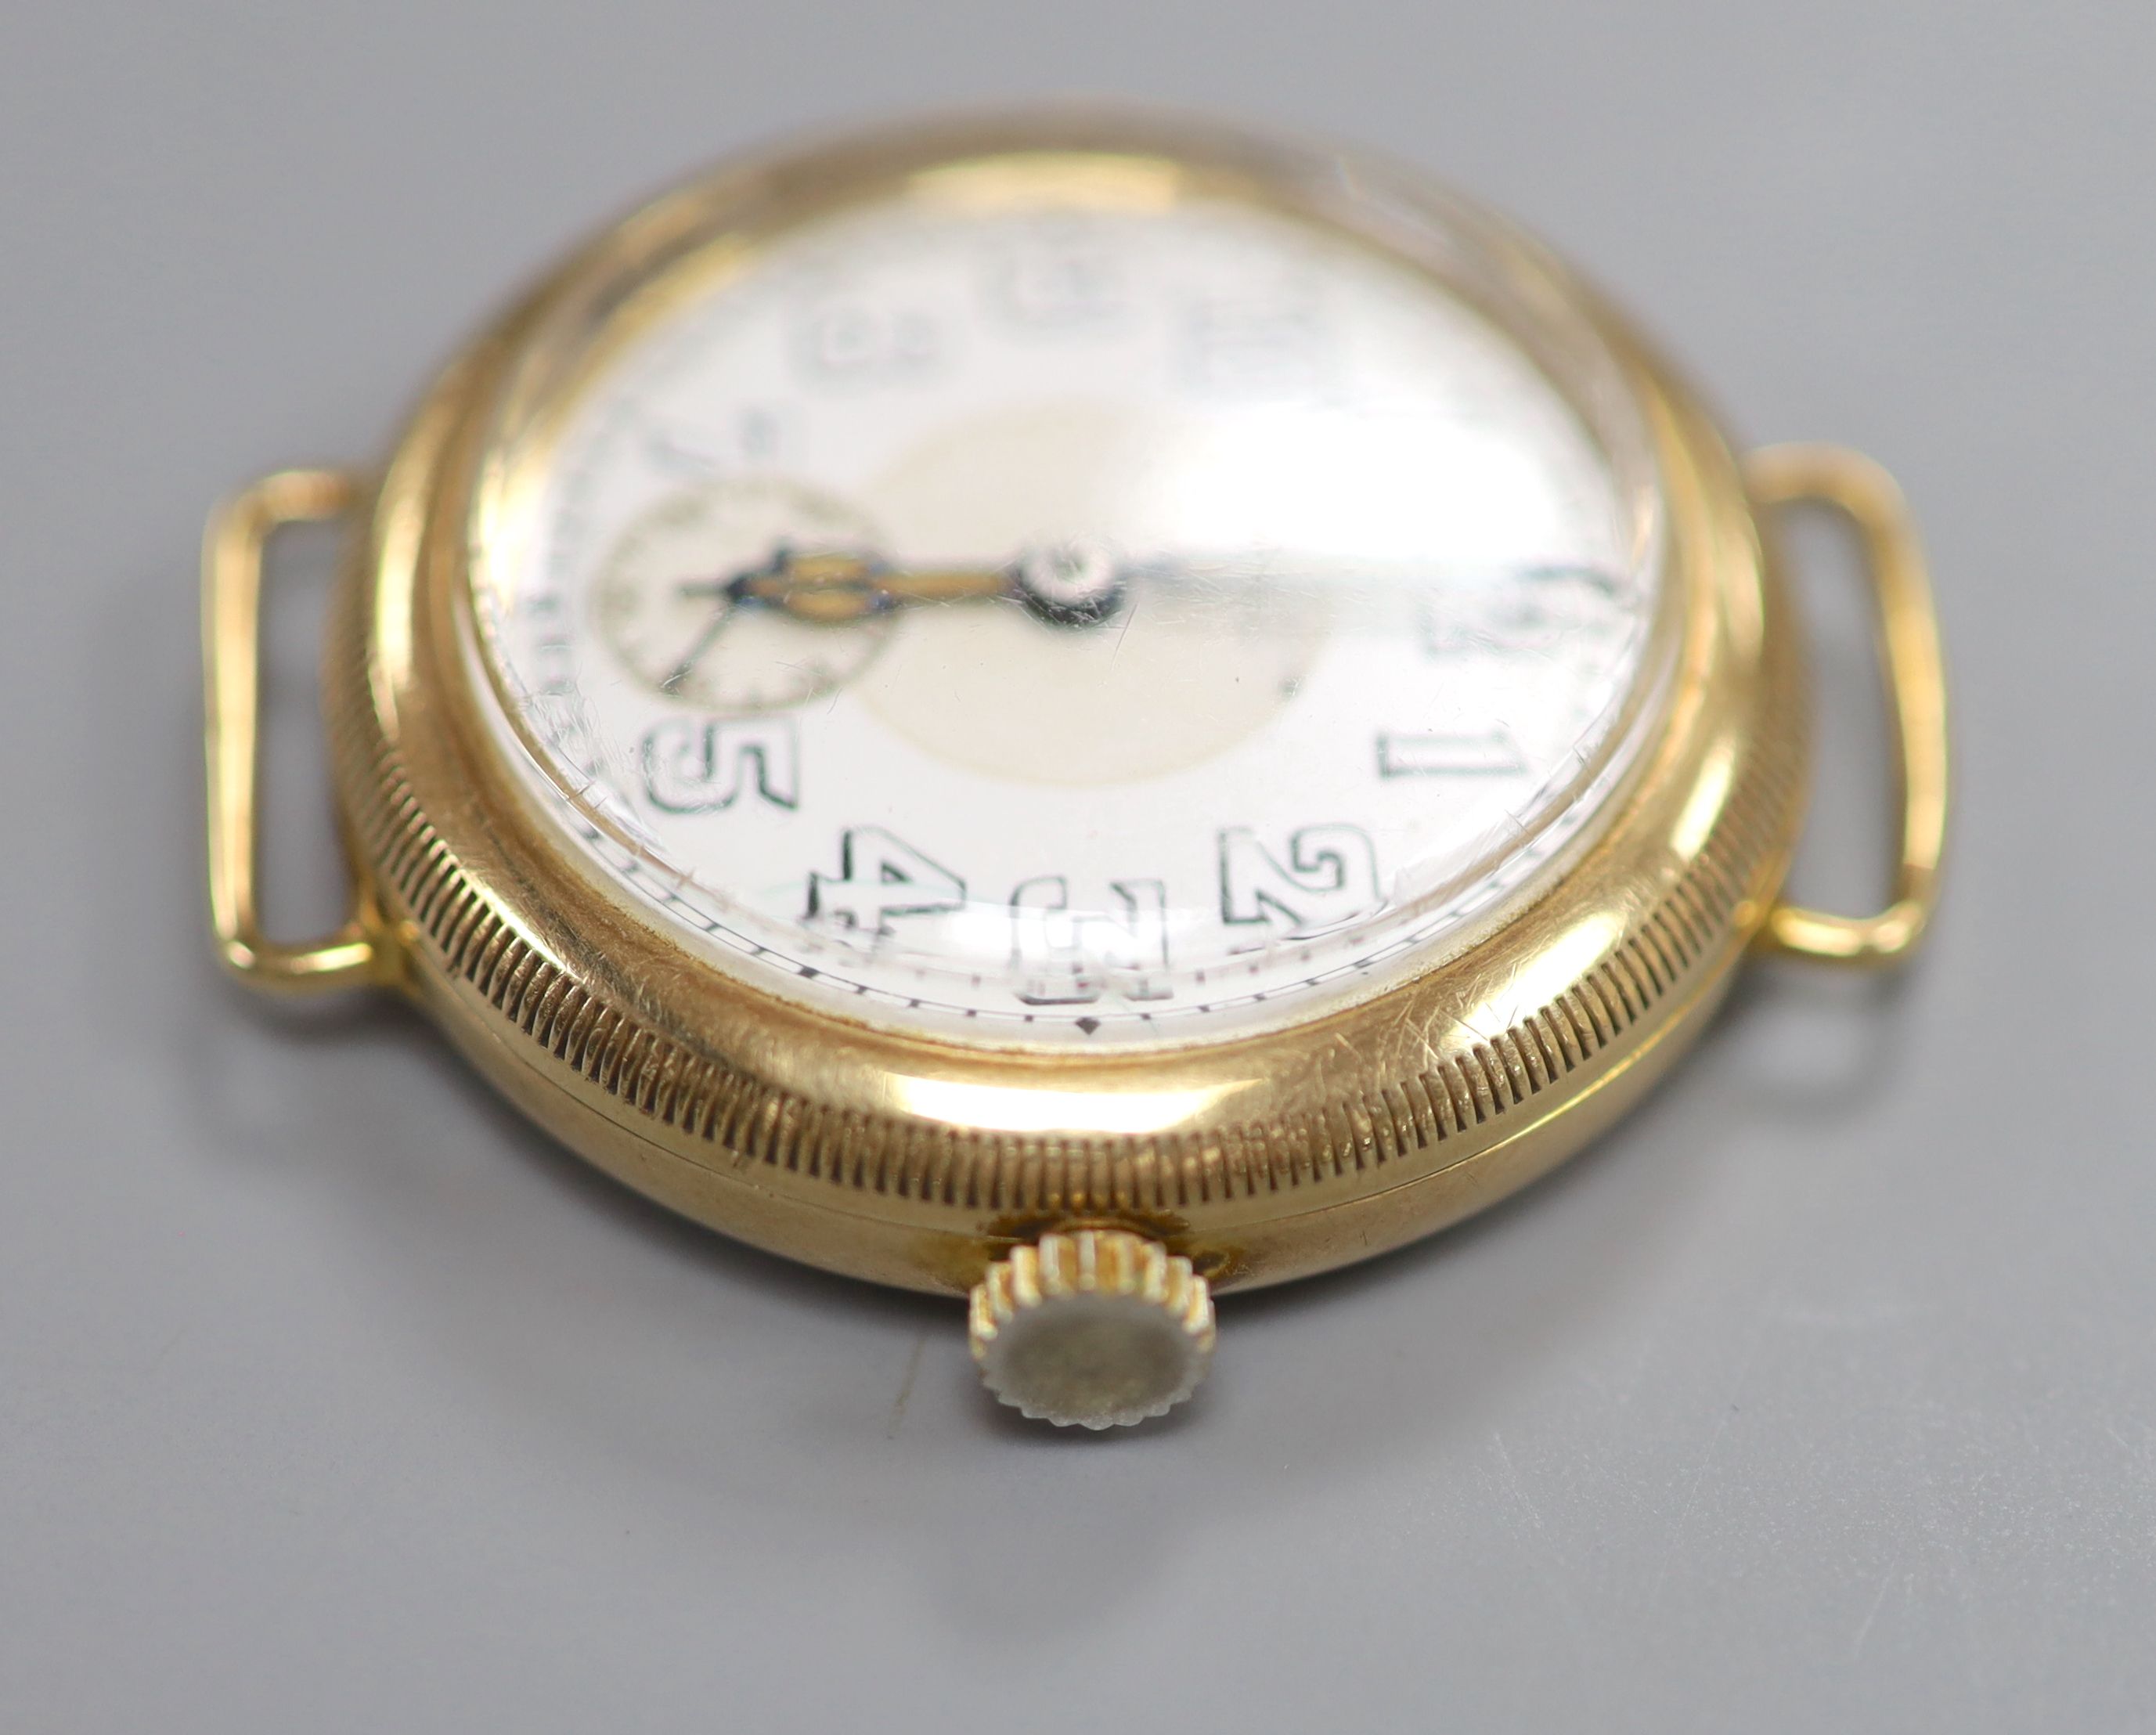 A gentleman's early 20th century 9ct gold Borgel cased manual wind wrist watch, no strap